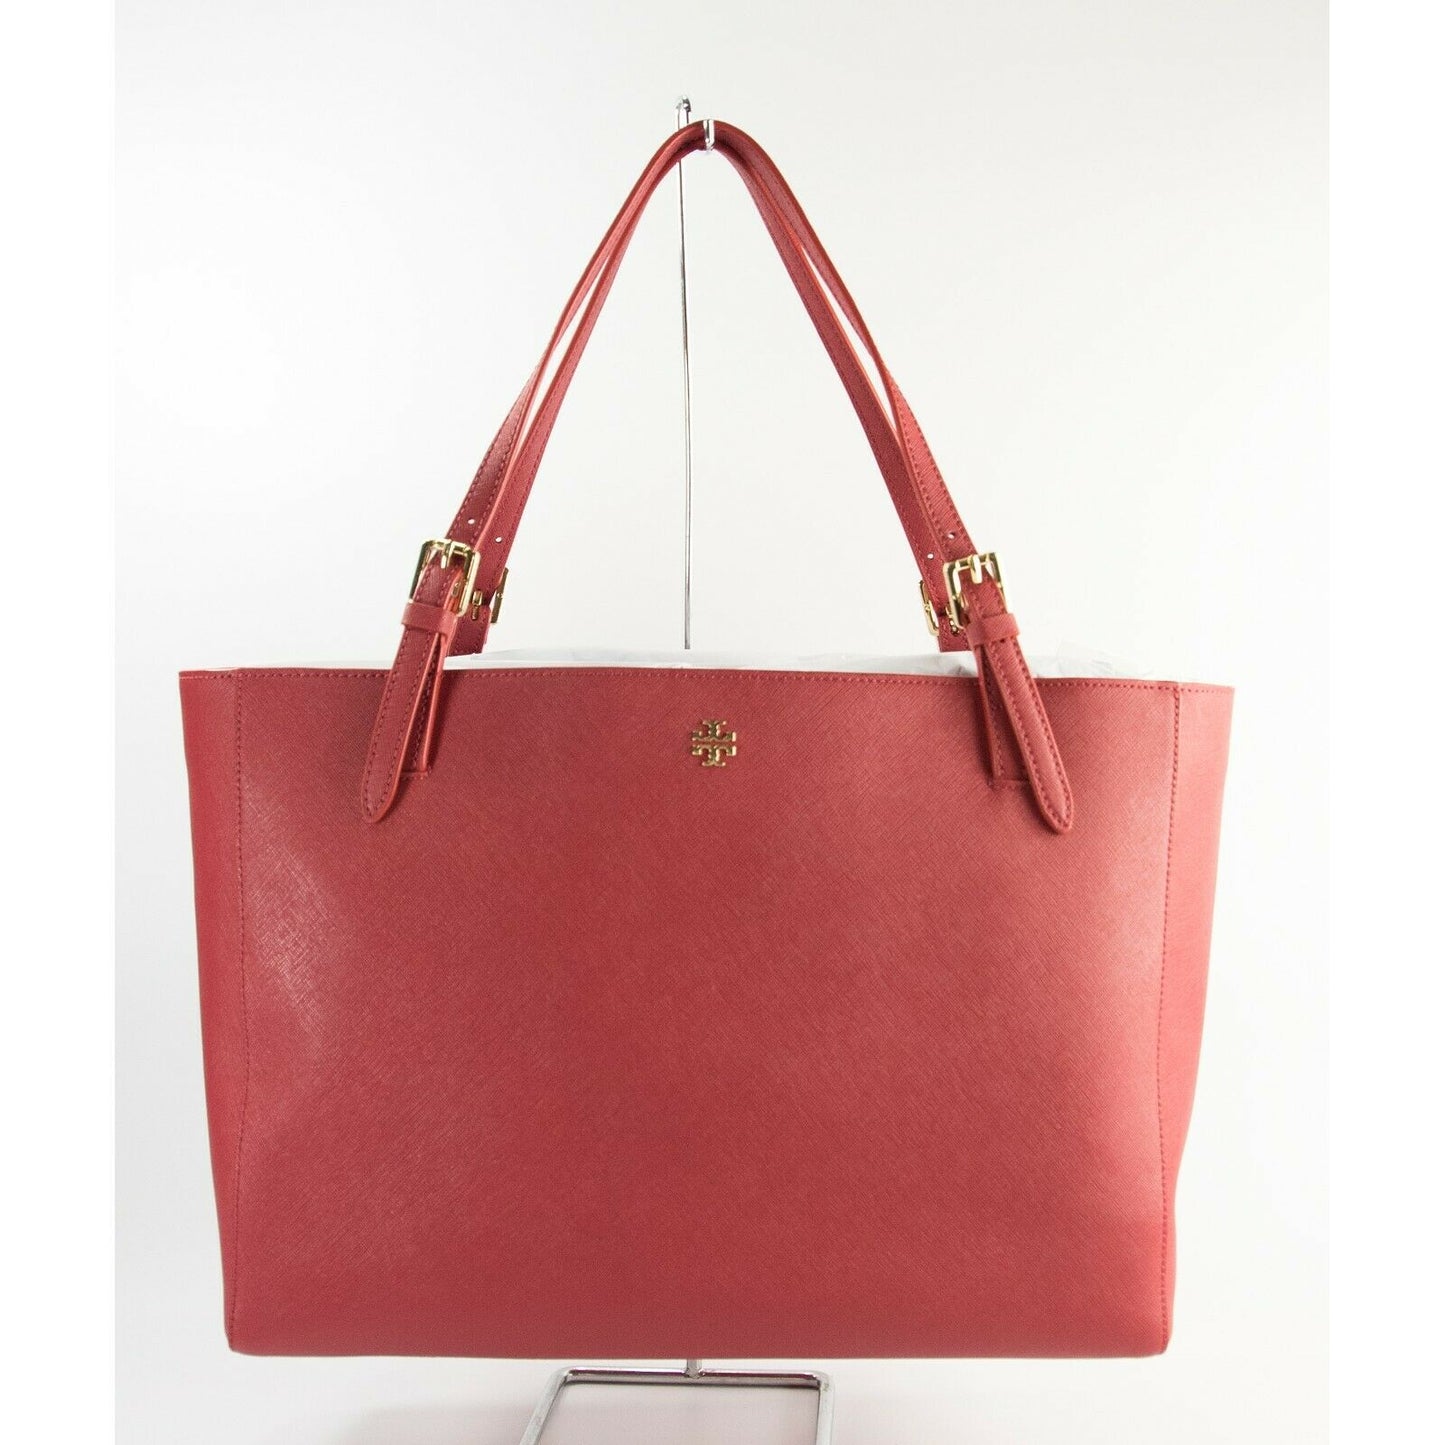 Tory Burch Kir Red Leather York Buckle Tote DEFECT NWT